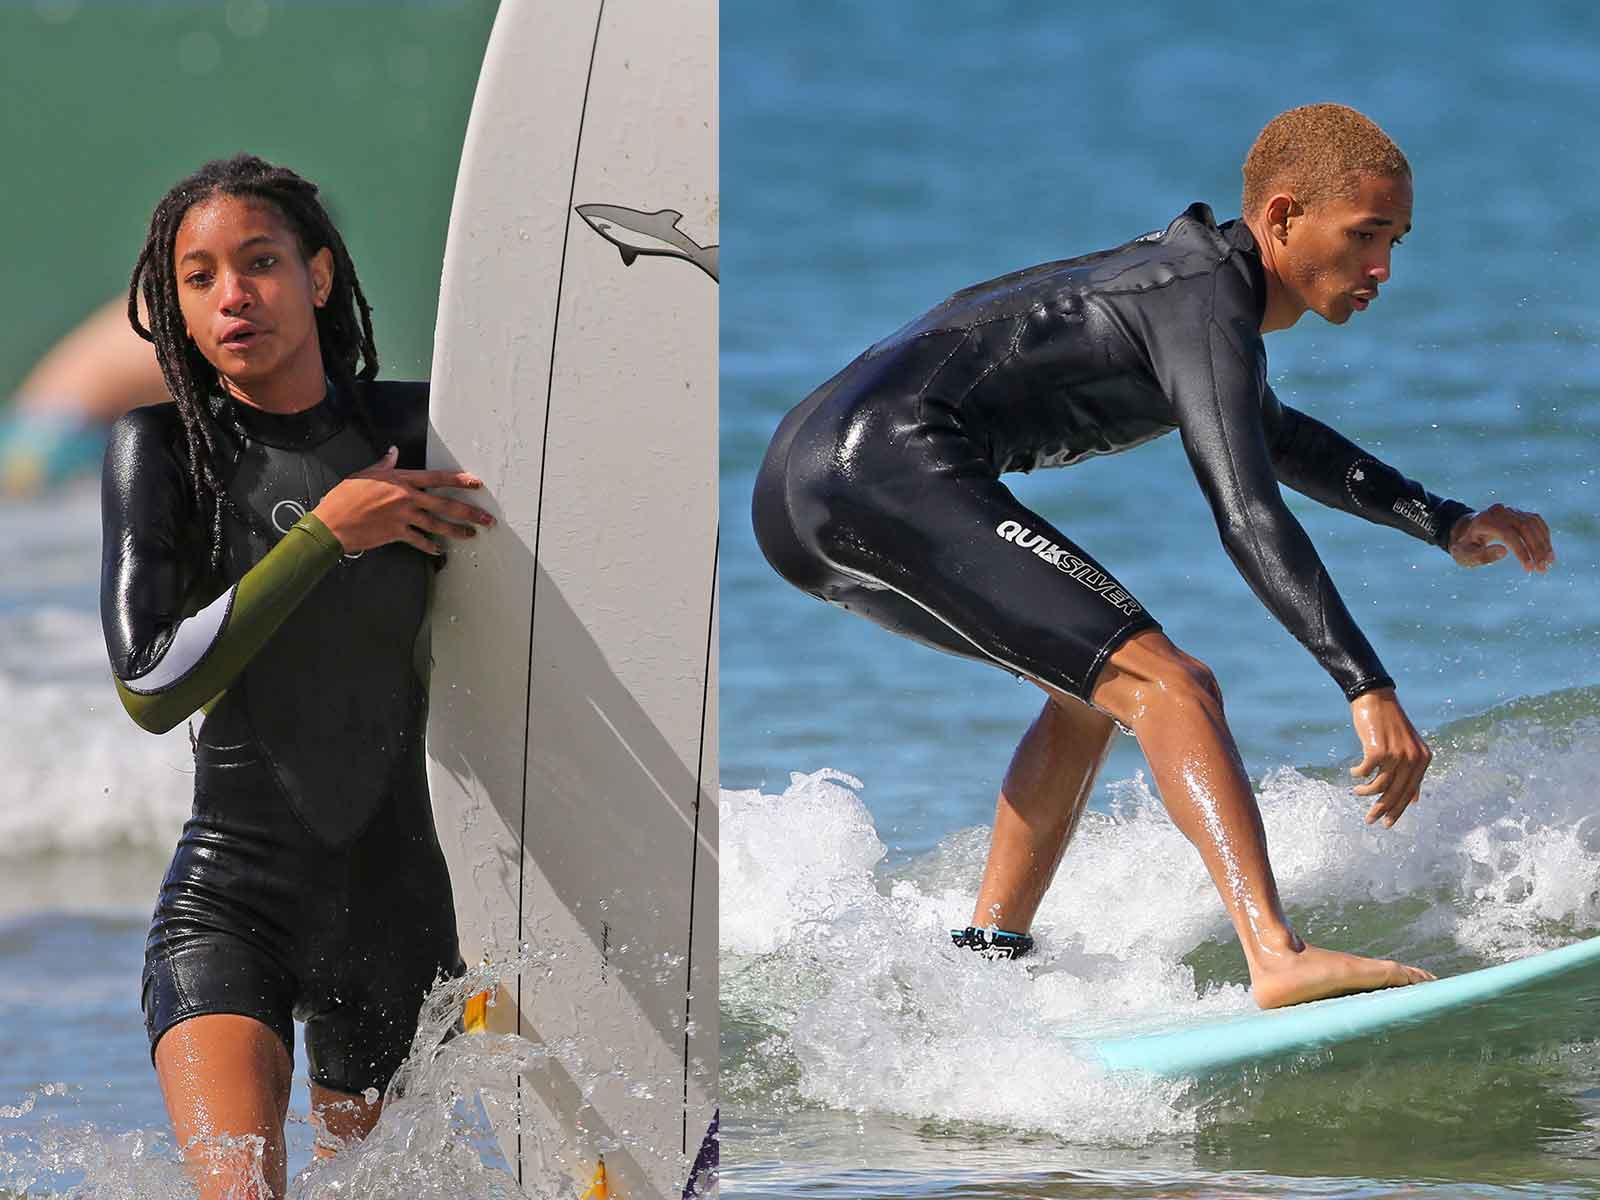 Jaden and Willow Smith: Siblings That Shred Together …